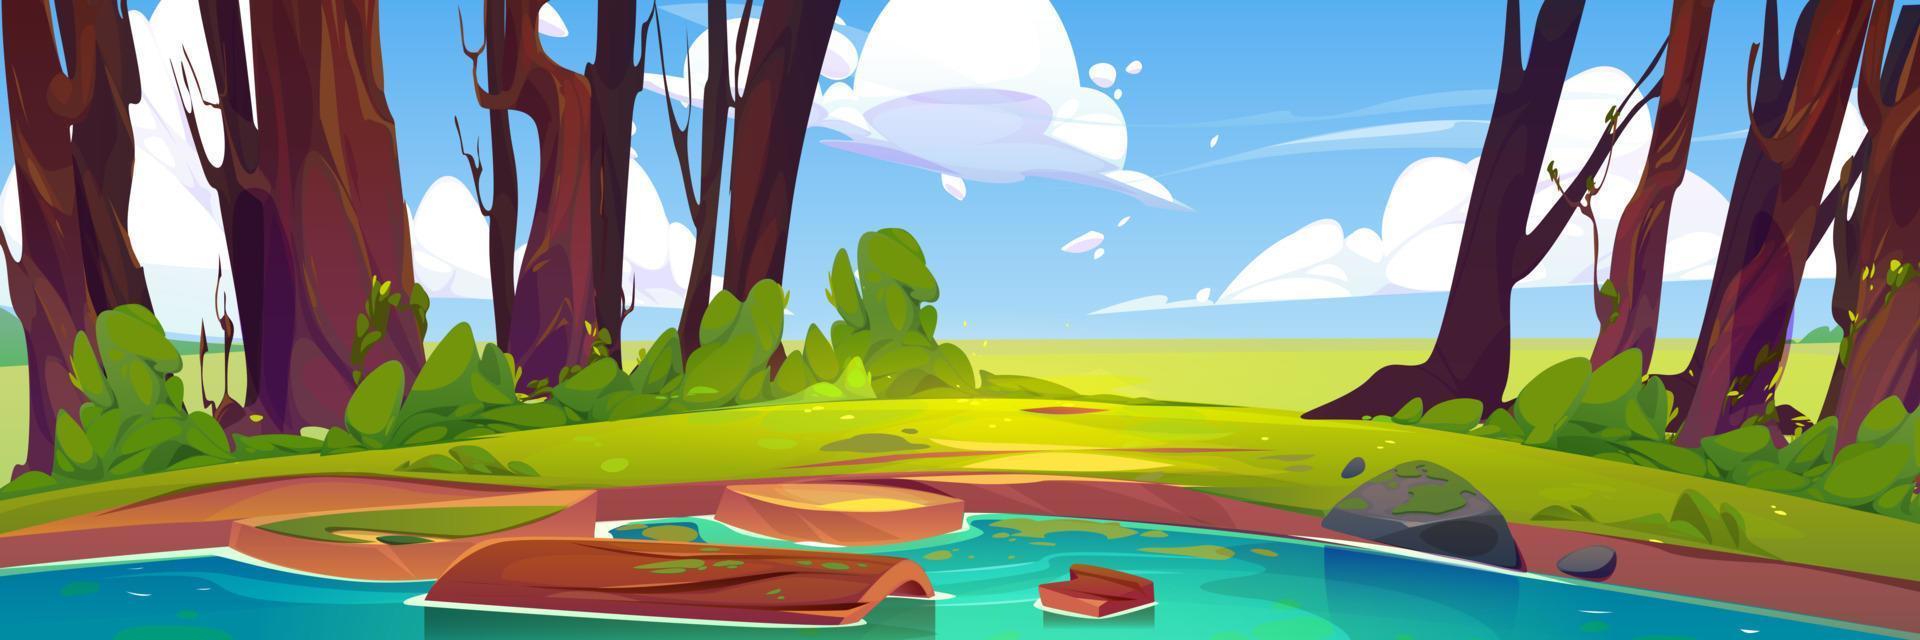 Nature scene with lake, green trees, grass vector